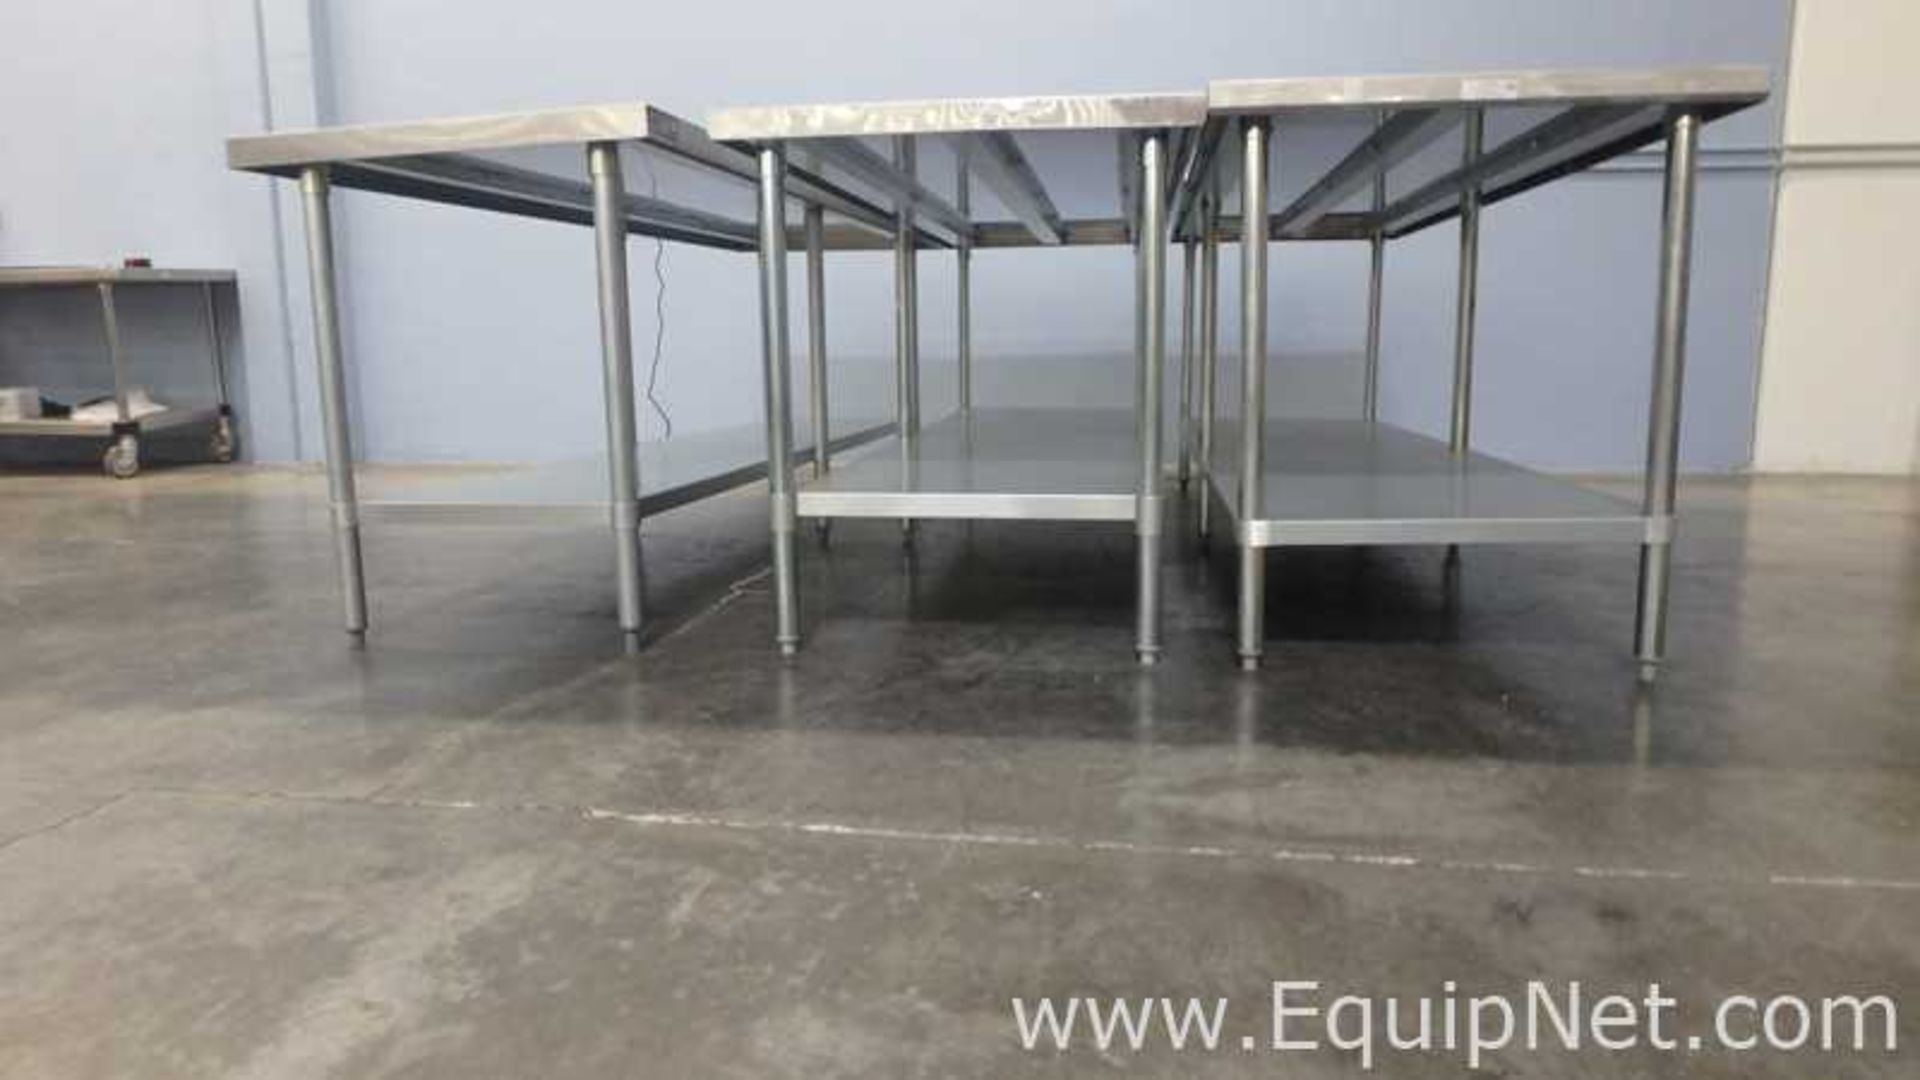 Lot of 3 GSW WT-EE3096 Economy Stainless Steel Work Table 96in x 30in - Image 6 of 9